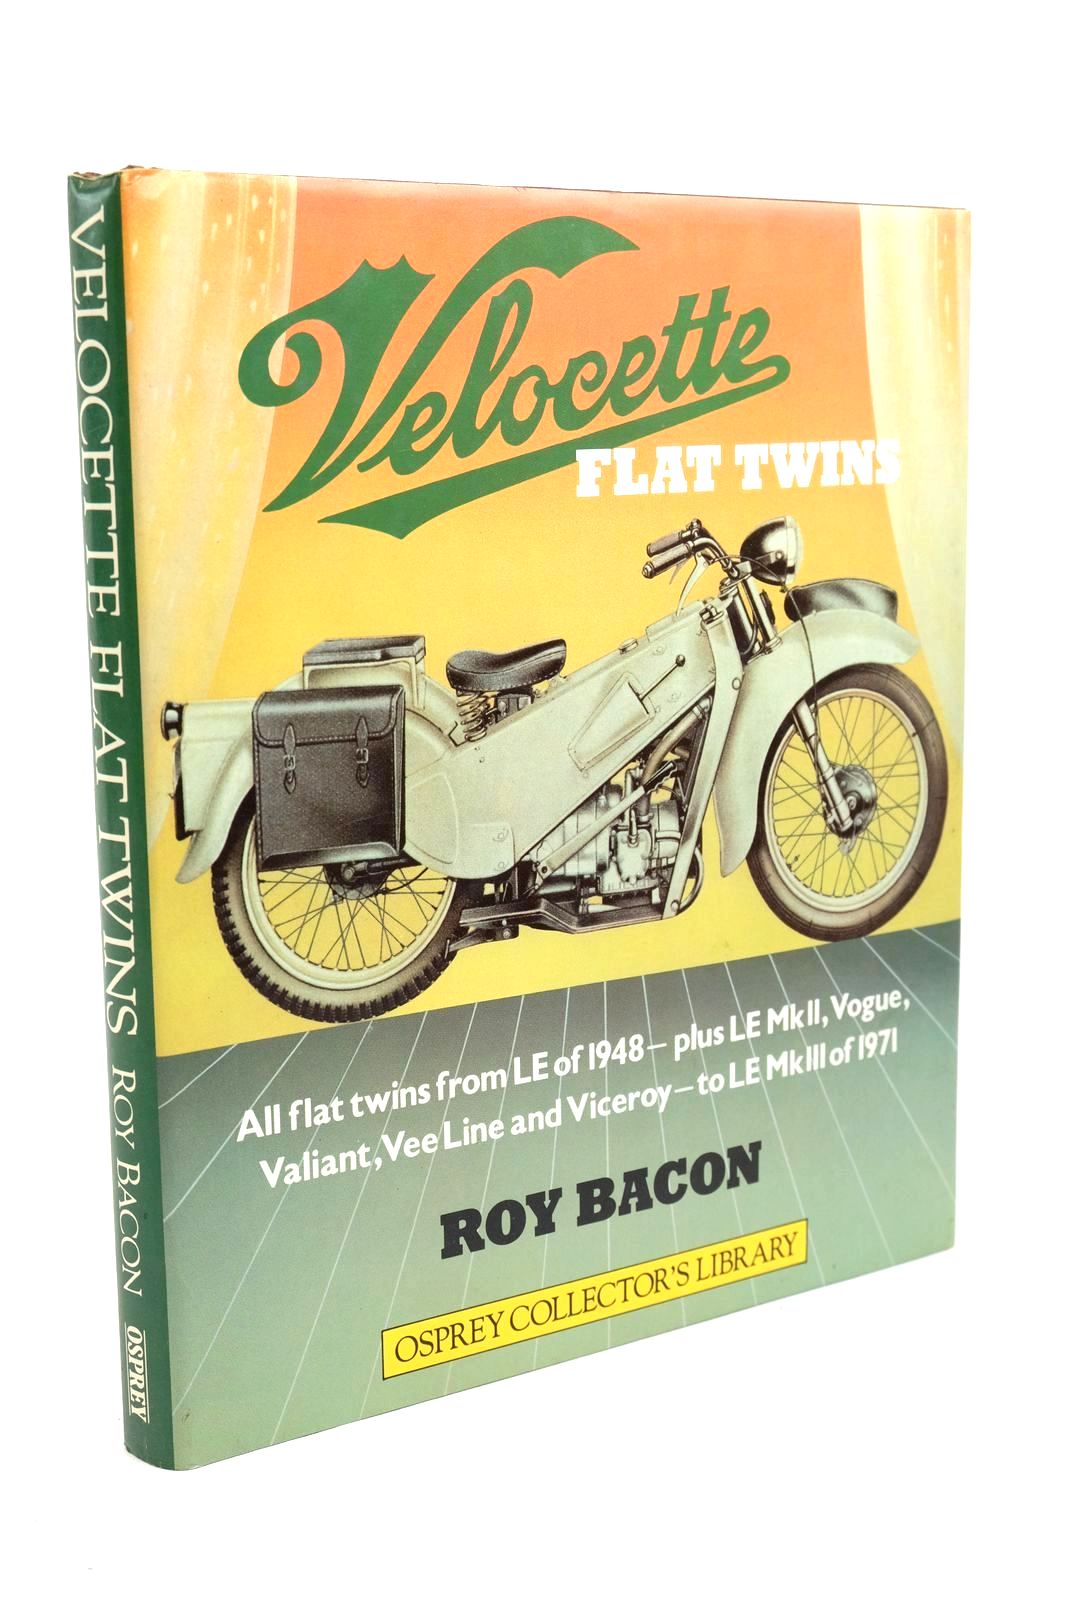 Photo of VELOCETTE FLAT-TWINS- Stock Number: 1321236